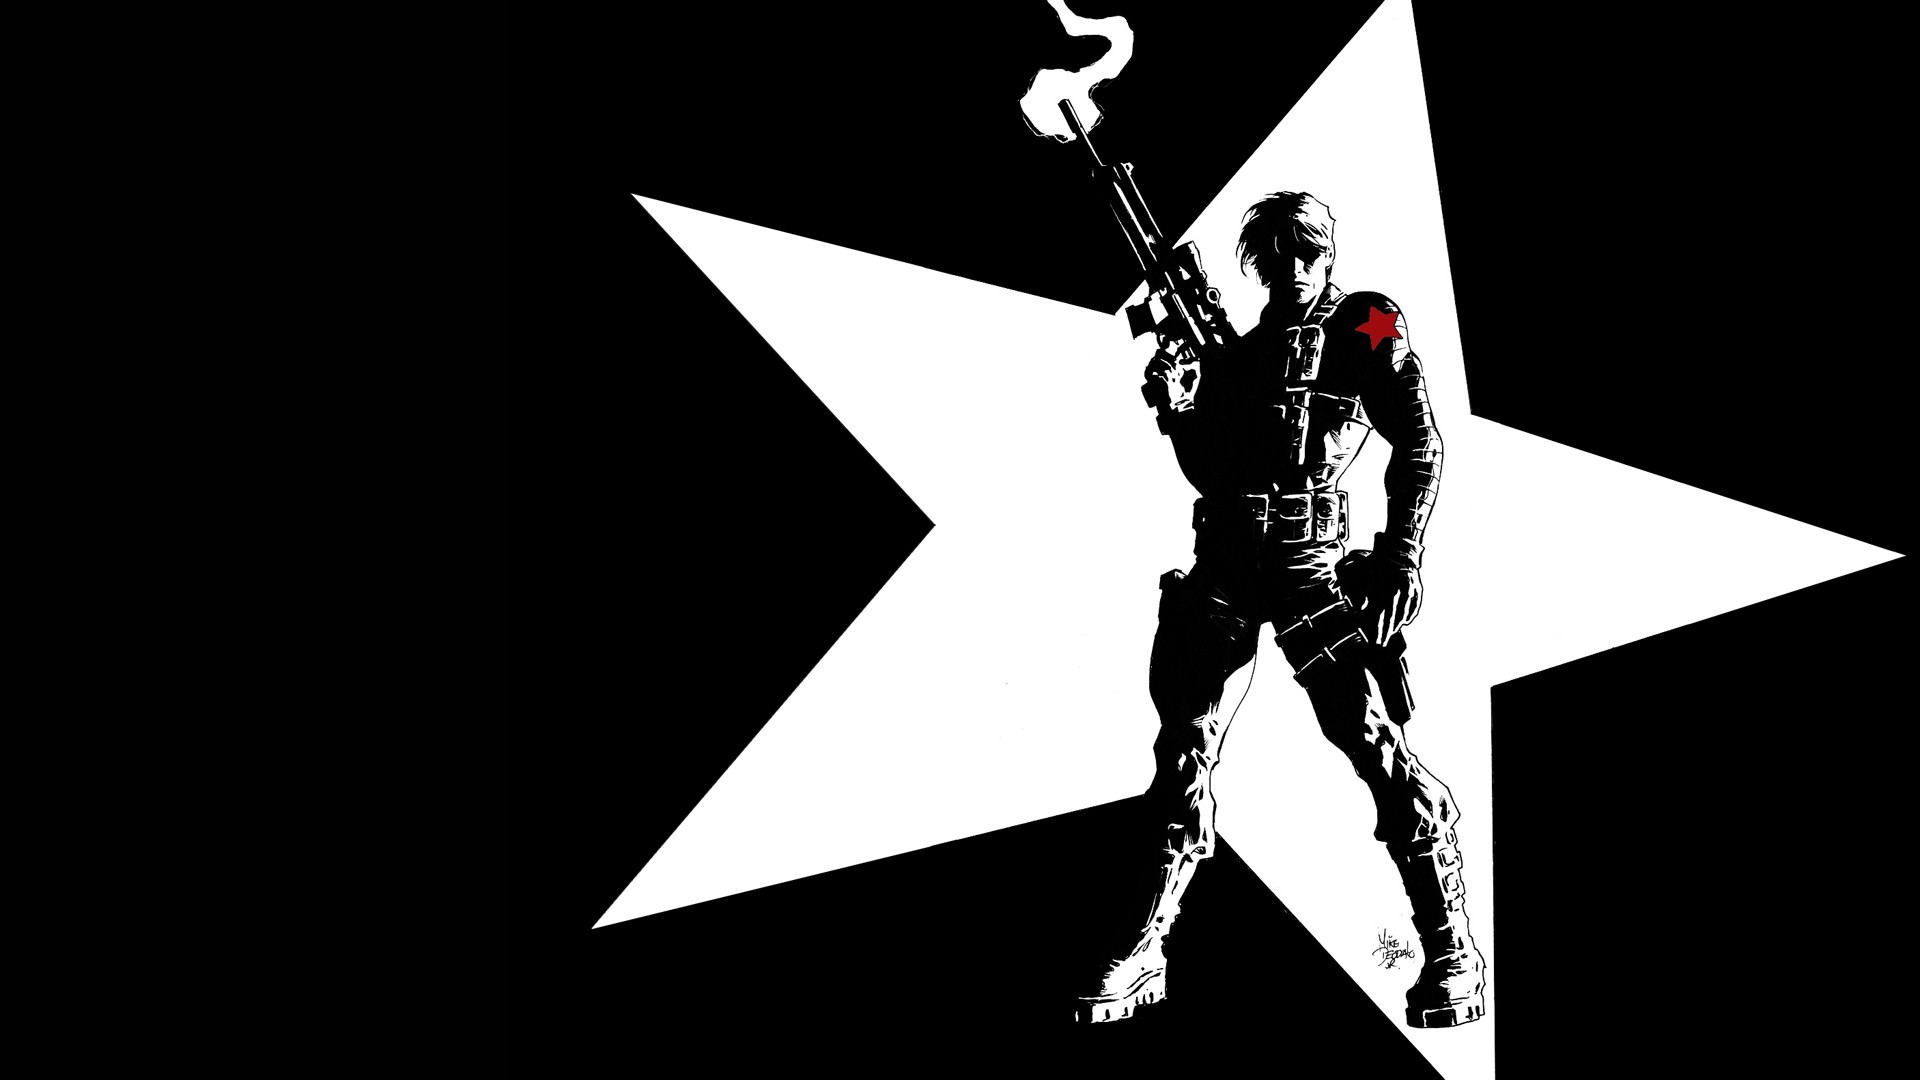 comics_winter_soldier_mike_deodato_1920x1080_58525